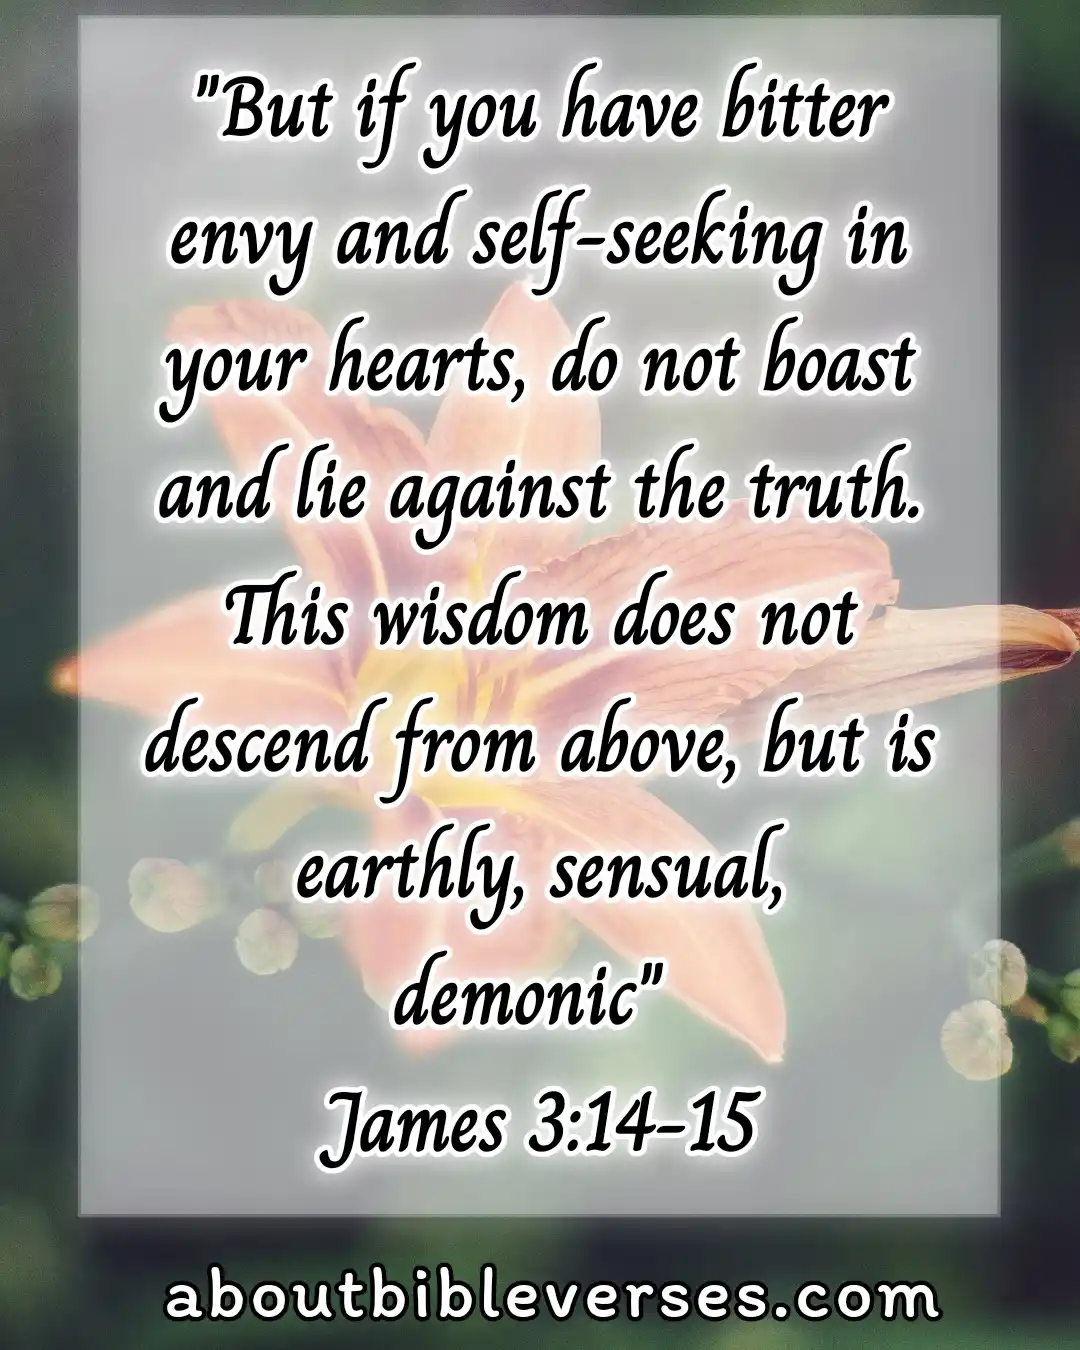 bible verses about jealousy and envy (James 3:14-15)